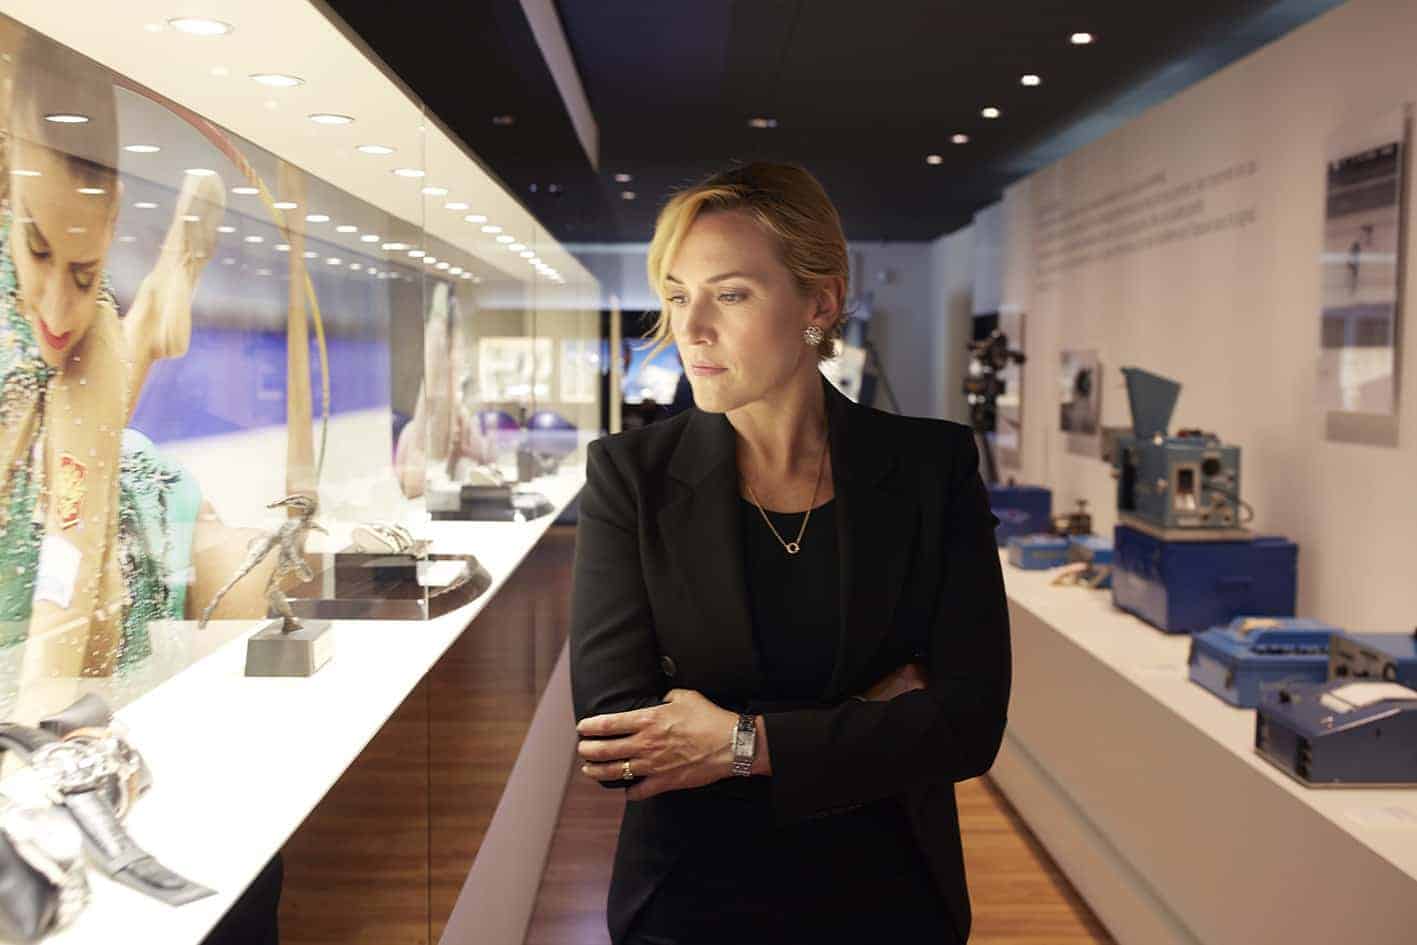 Longines and Kate Winslet 